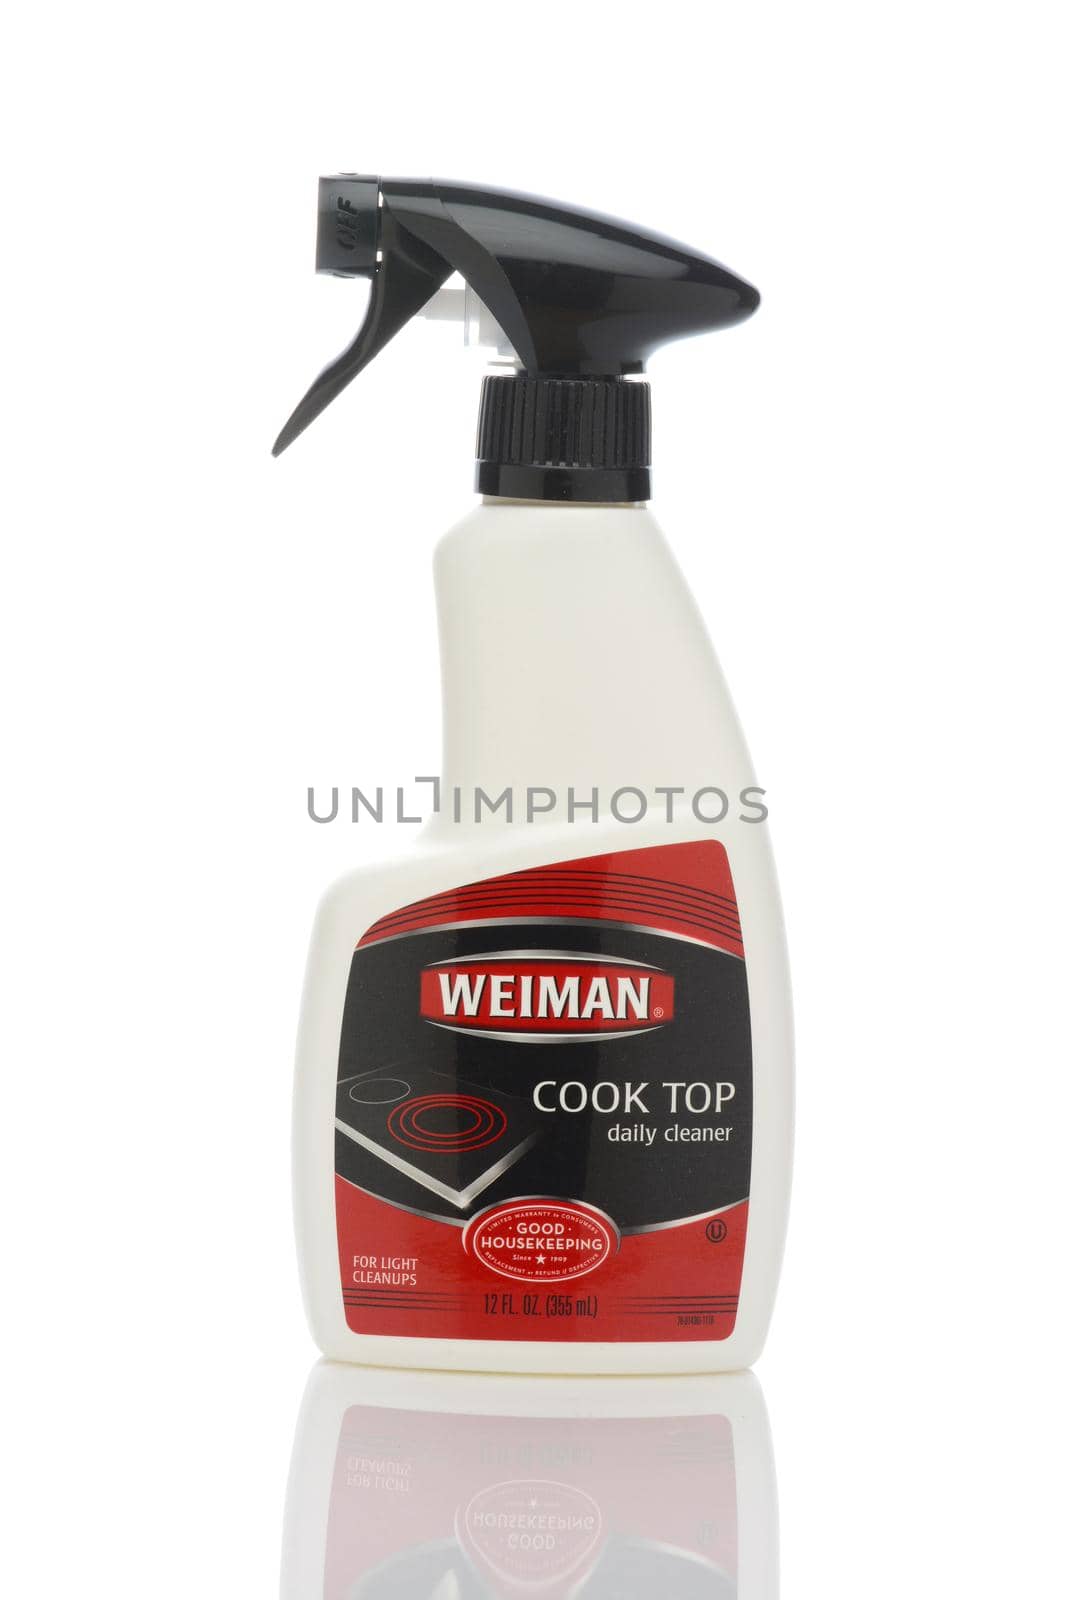 A spray bottle of Weiman Cook Top  Daily Cleaner.  by sCukrov